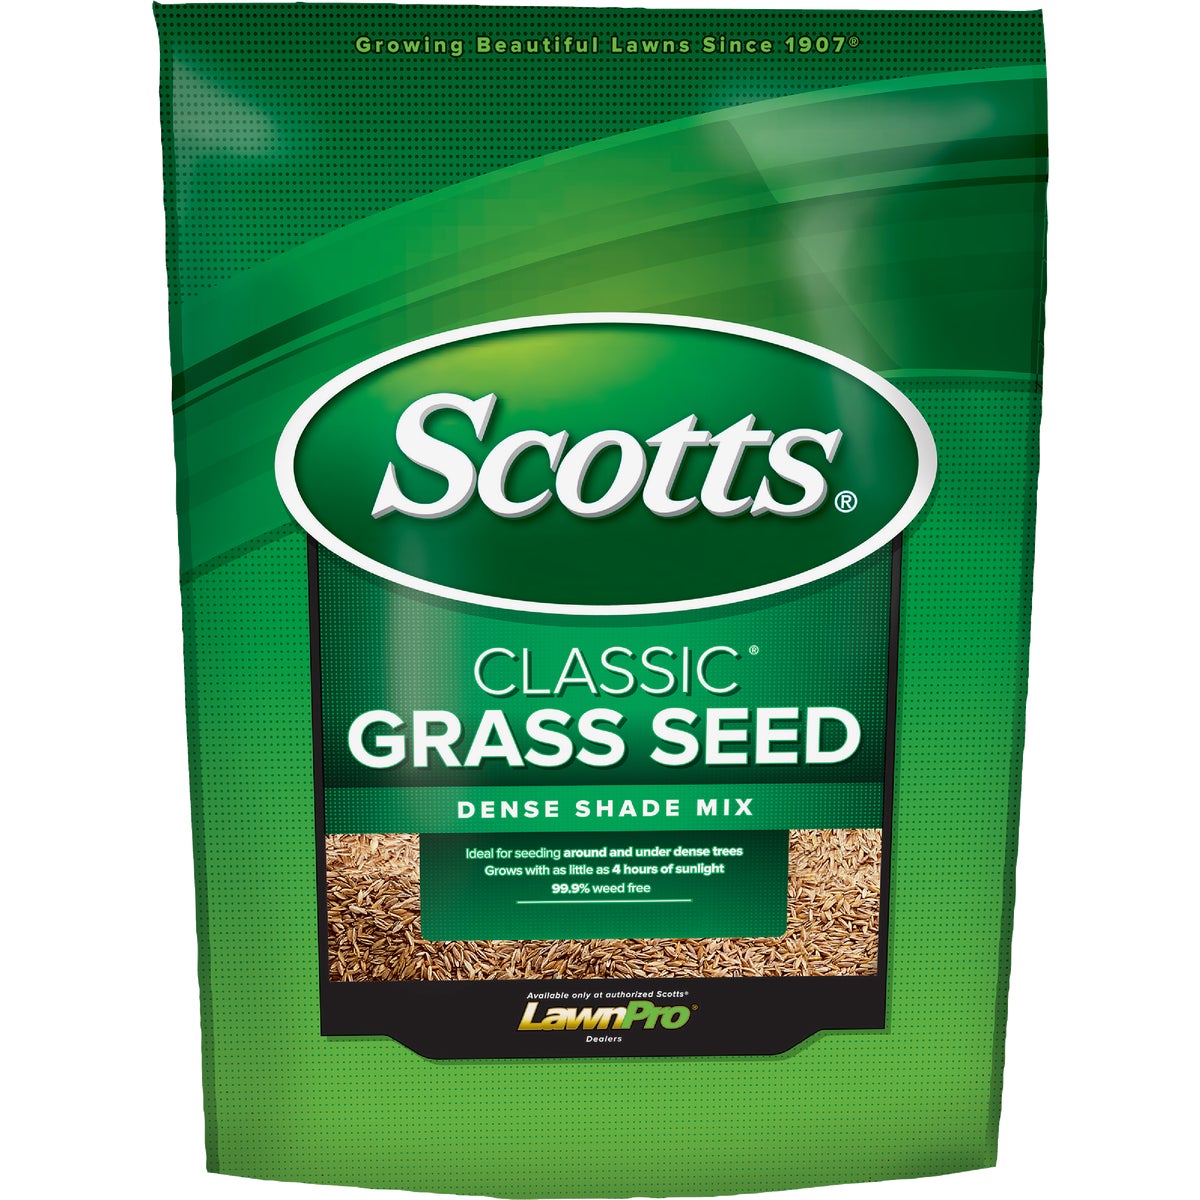 Item 700133, Ideal seed mix for seeding around or under dense trees.